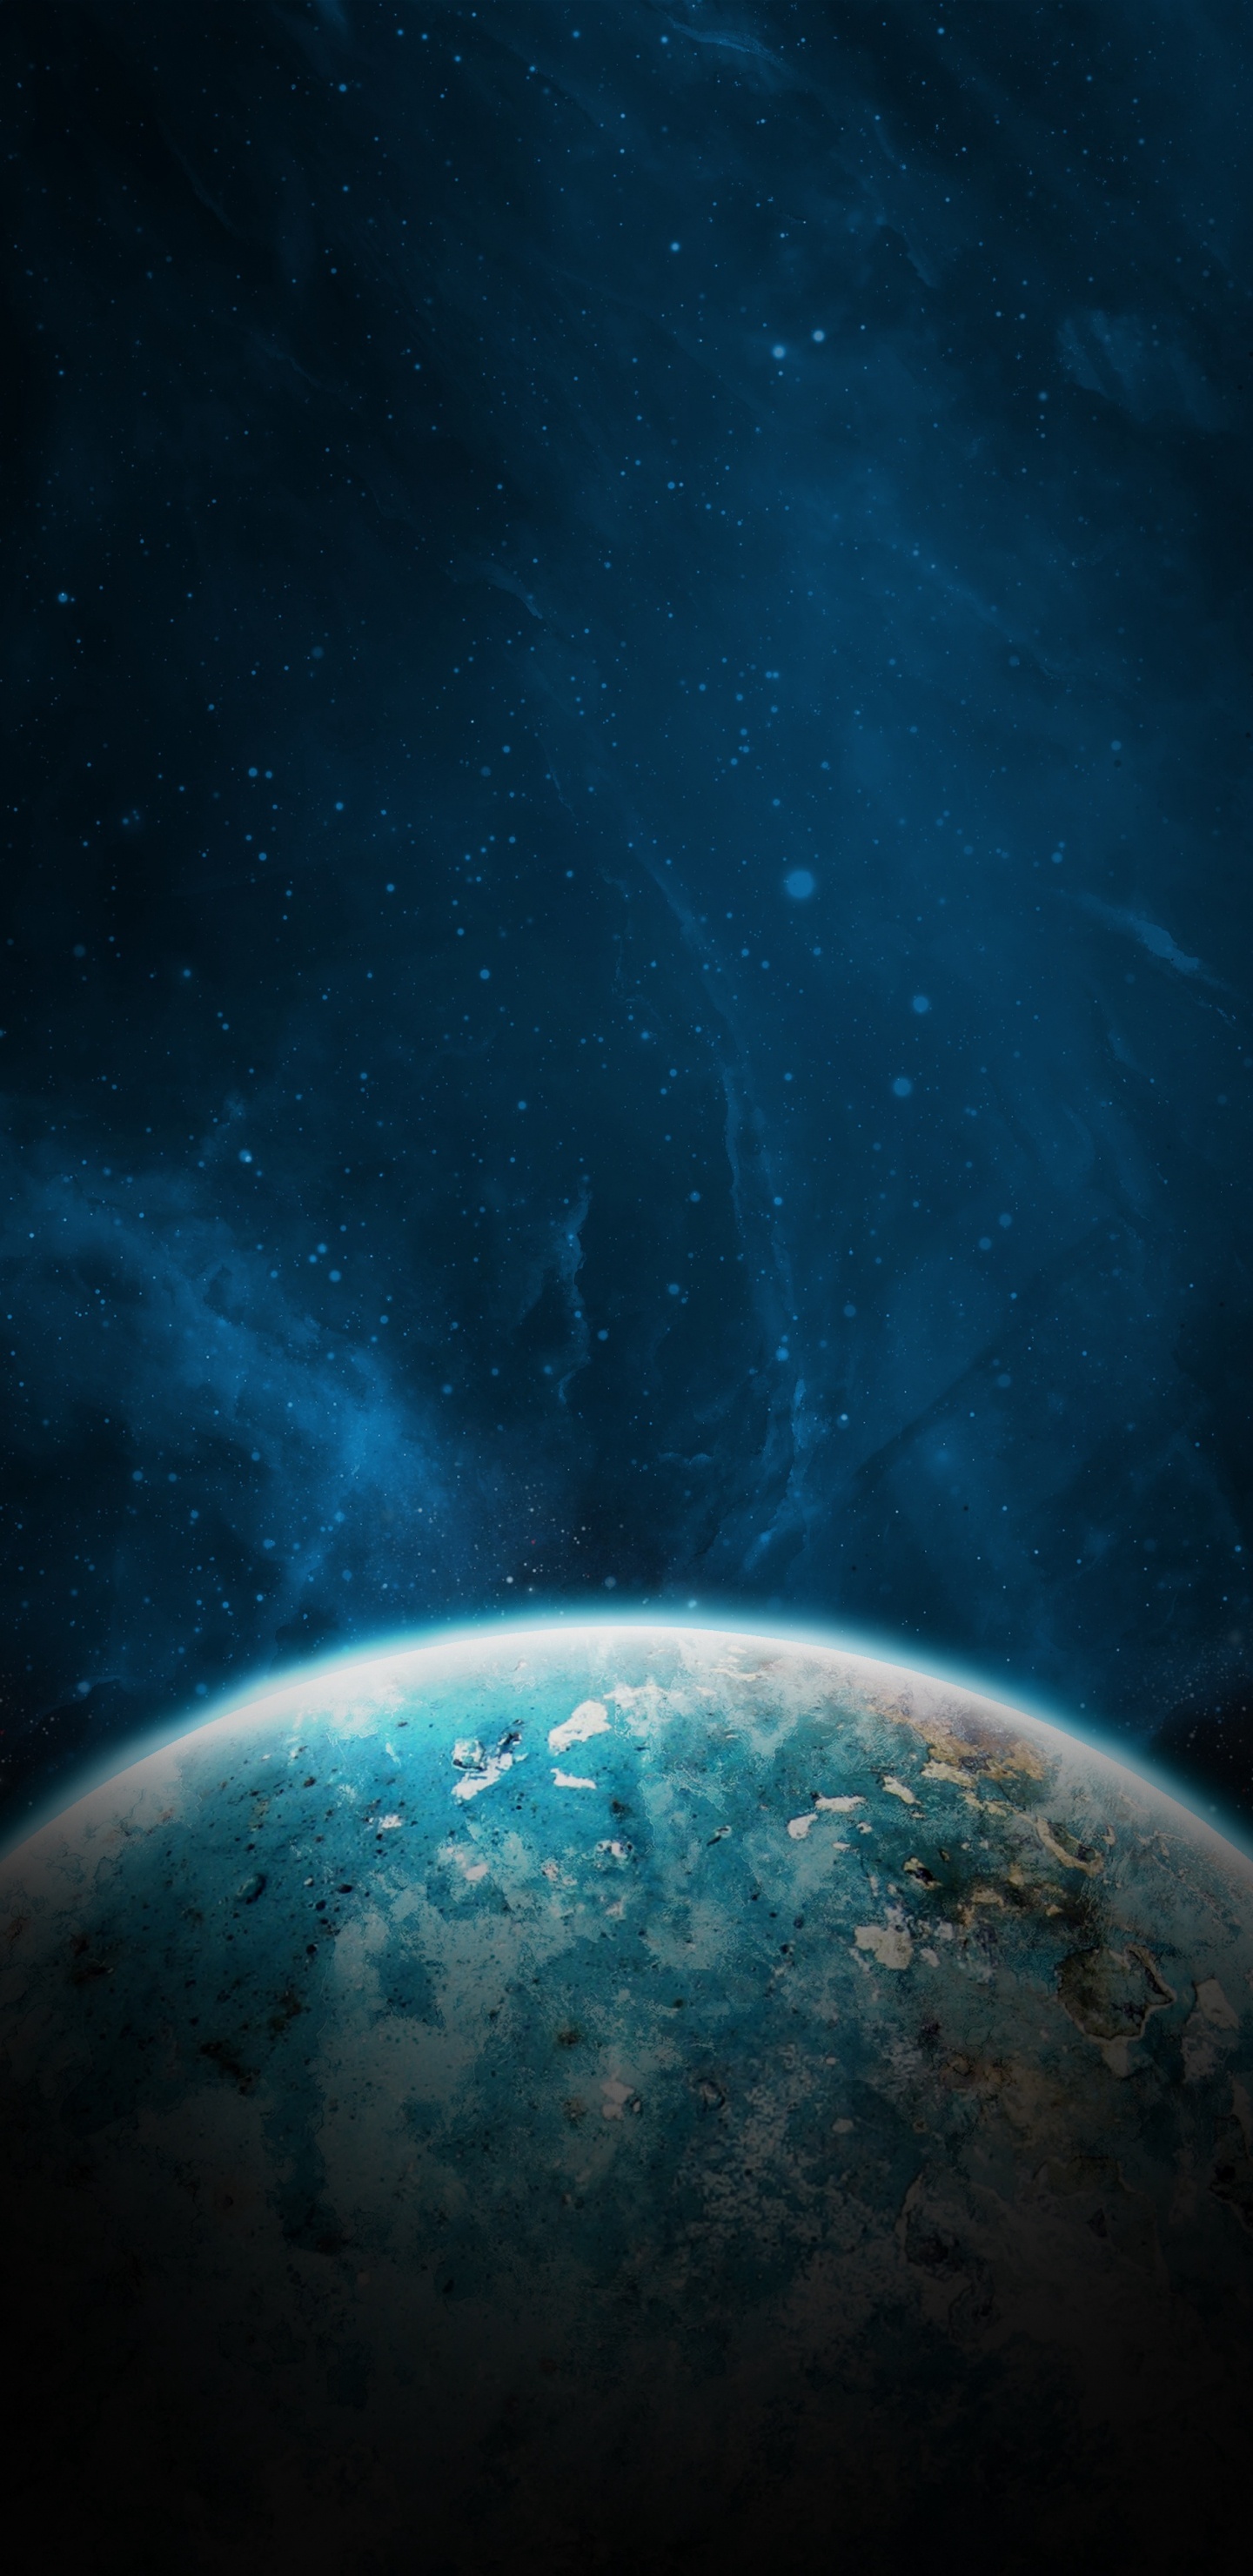 Blue and Black Planet With Stars. Wallpaper in 1440x2960 Resolution